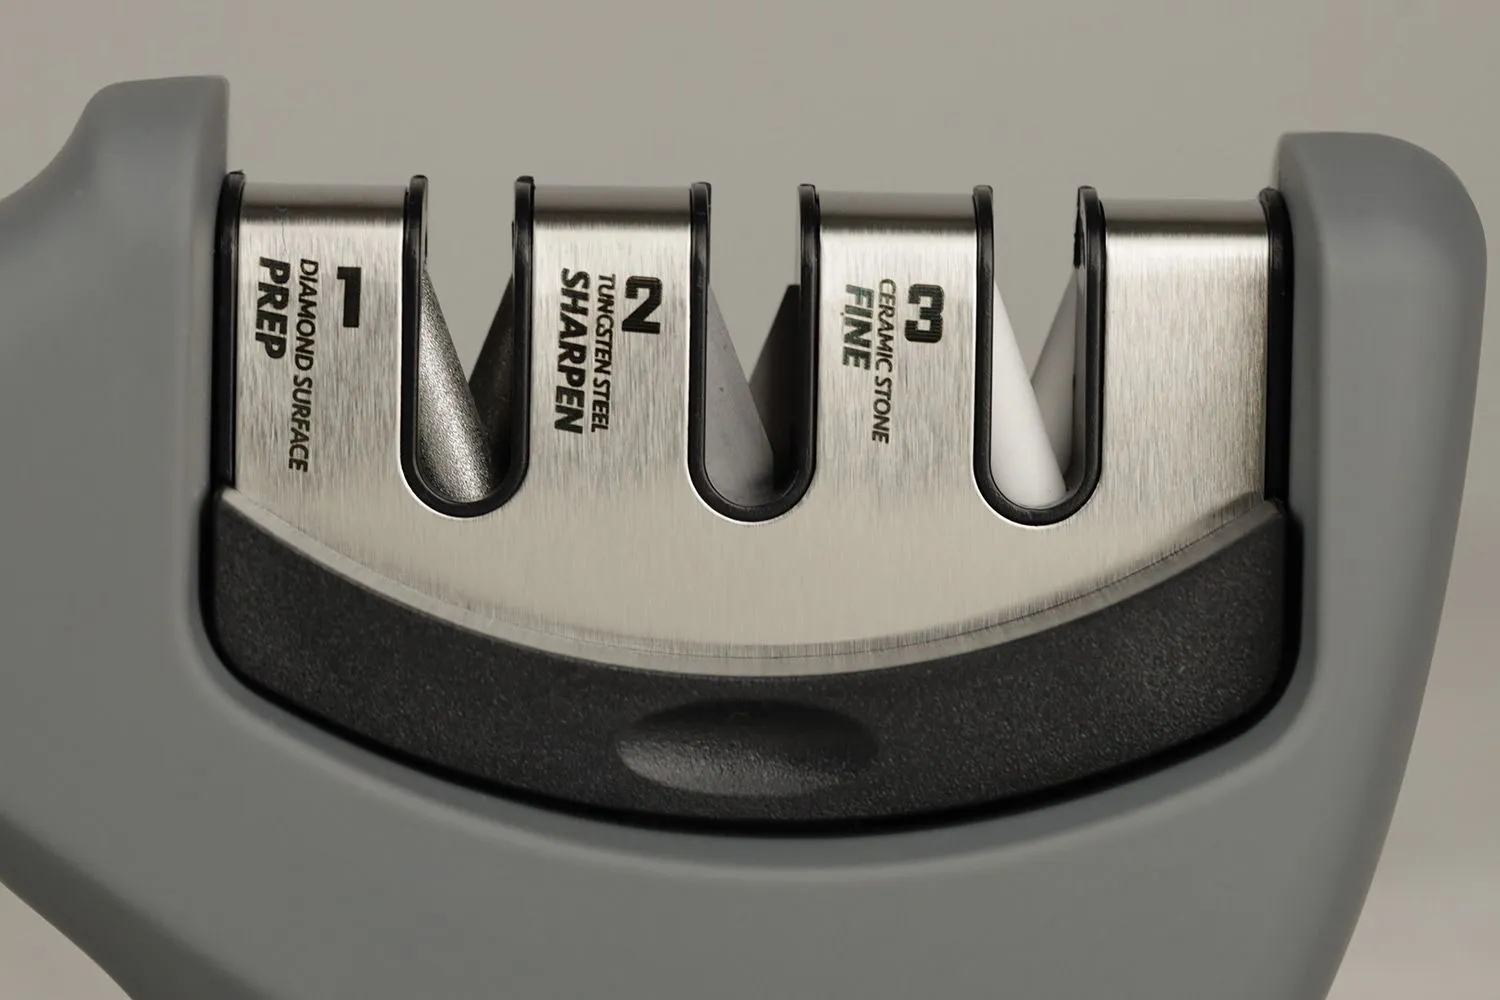 Amesser A-65 Manual Knife Sharpener In-depth Review - Healthy